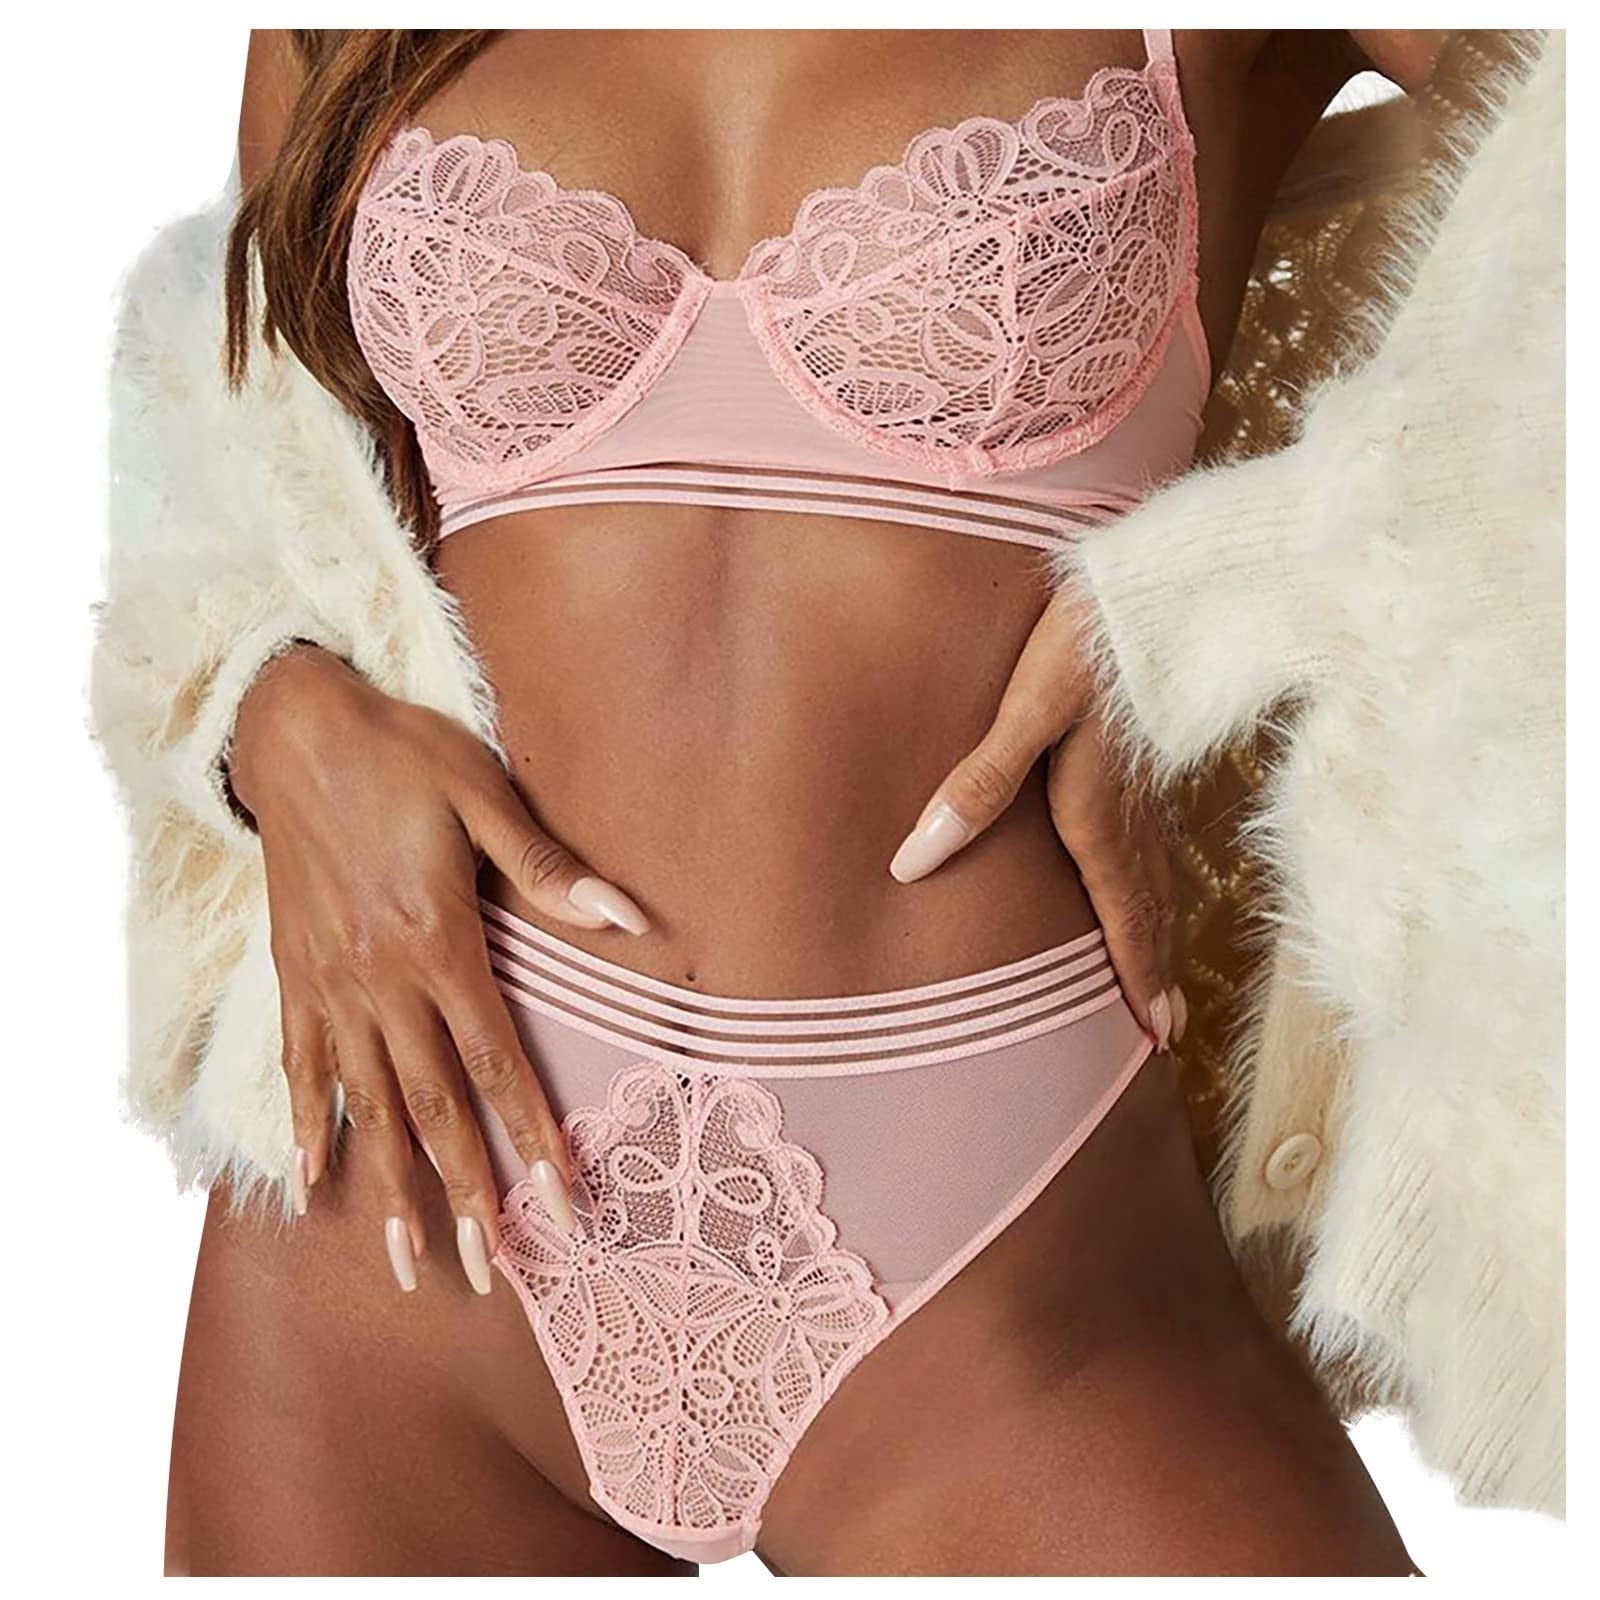 VerPetridure Sexy Lingerie for Women Plus Size Women Sexy Lingerie Set  Women Sexy Lace Lingerie Set Strappy Bra And Panty Set Two Piece Babydoll Crotchless  Lingerie 